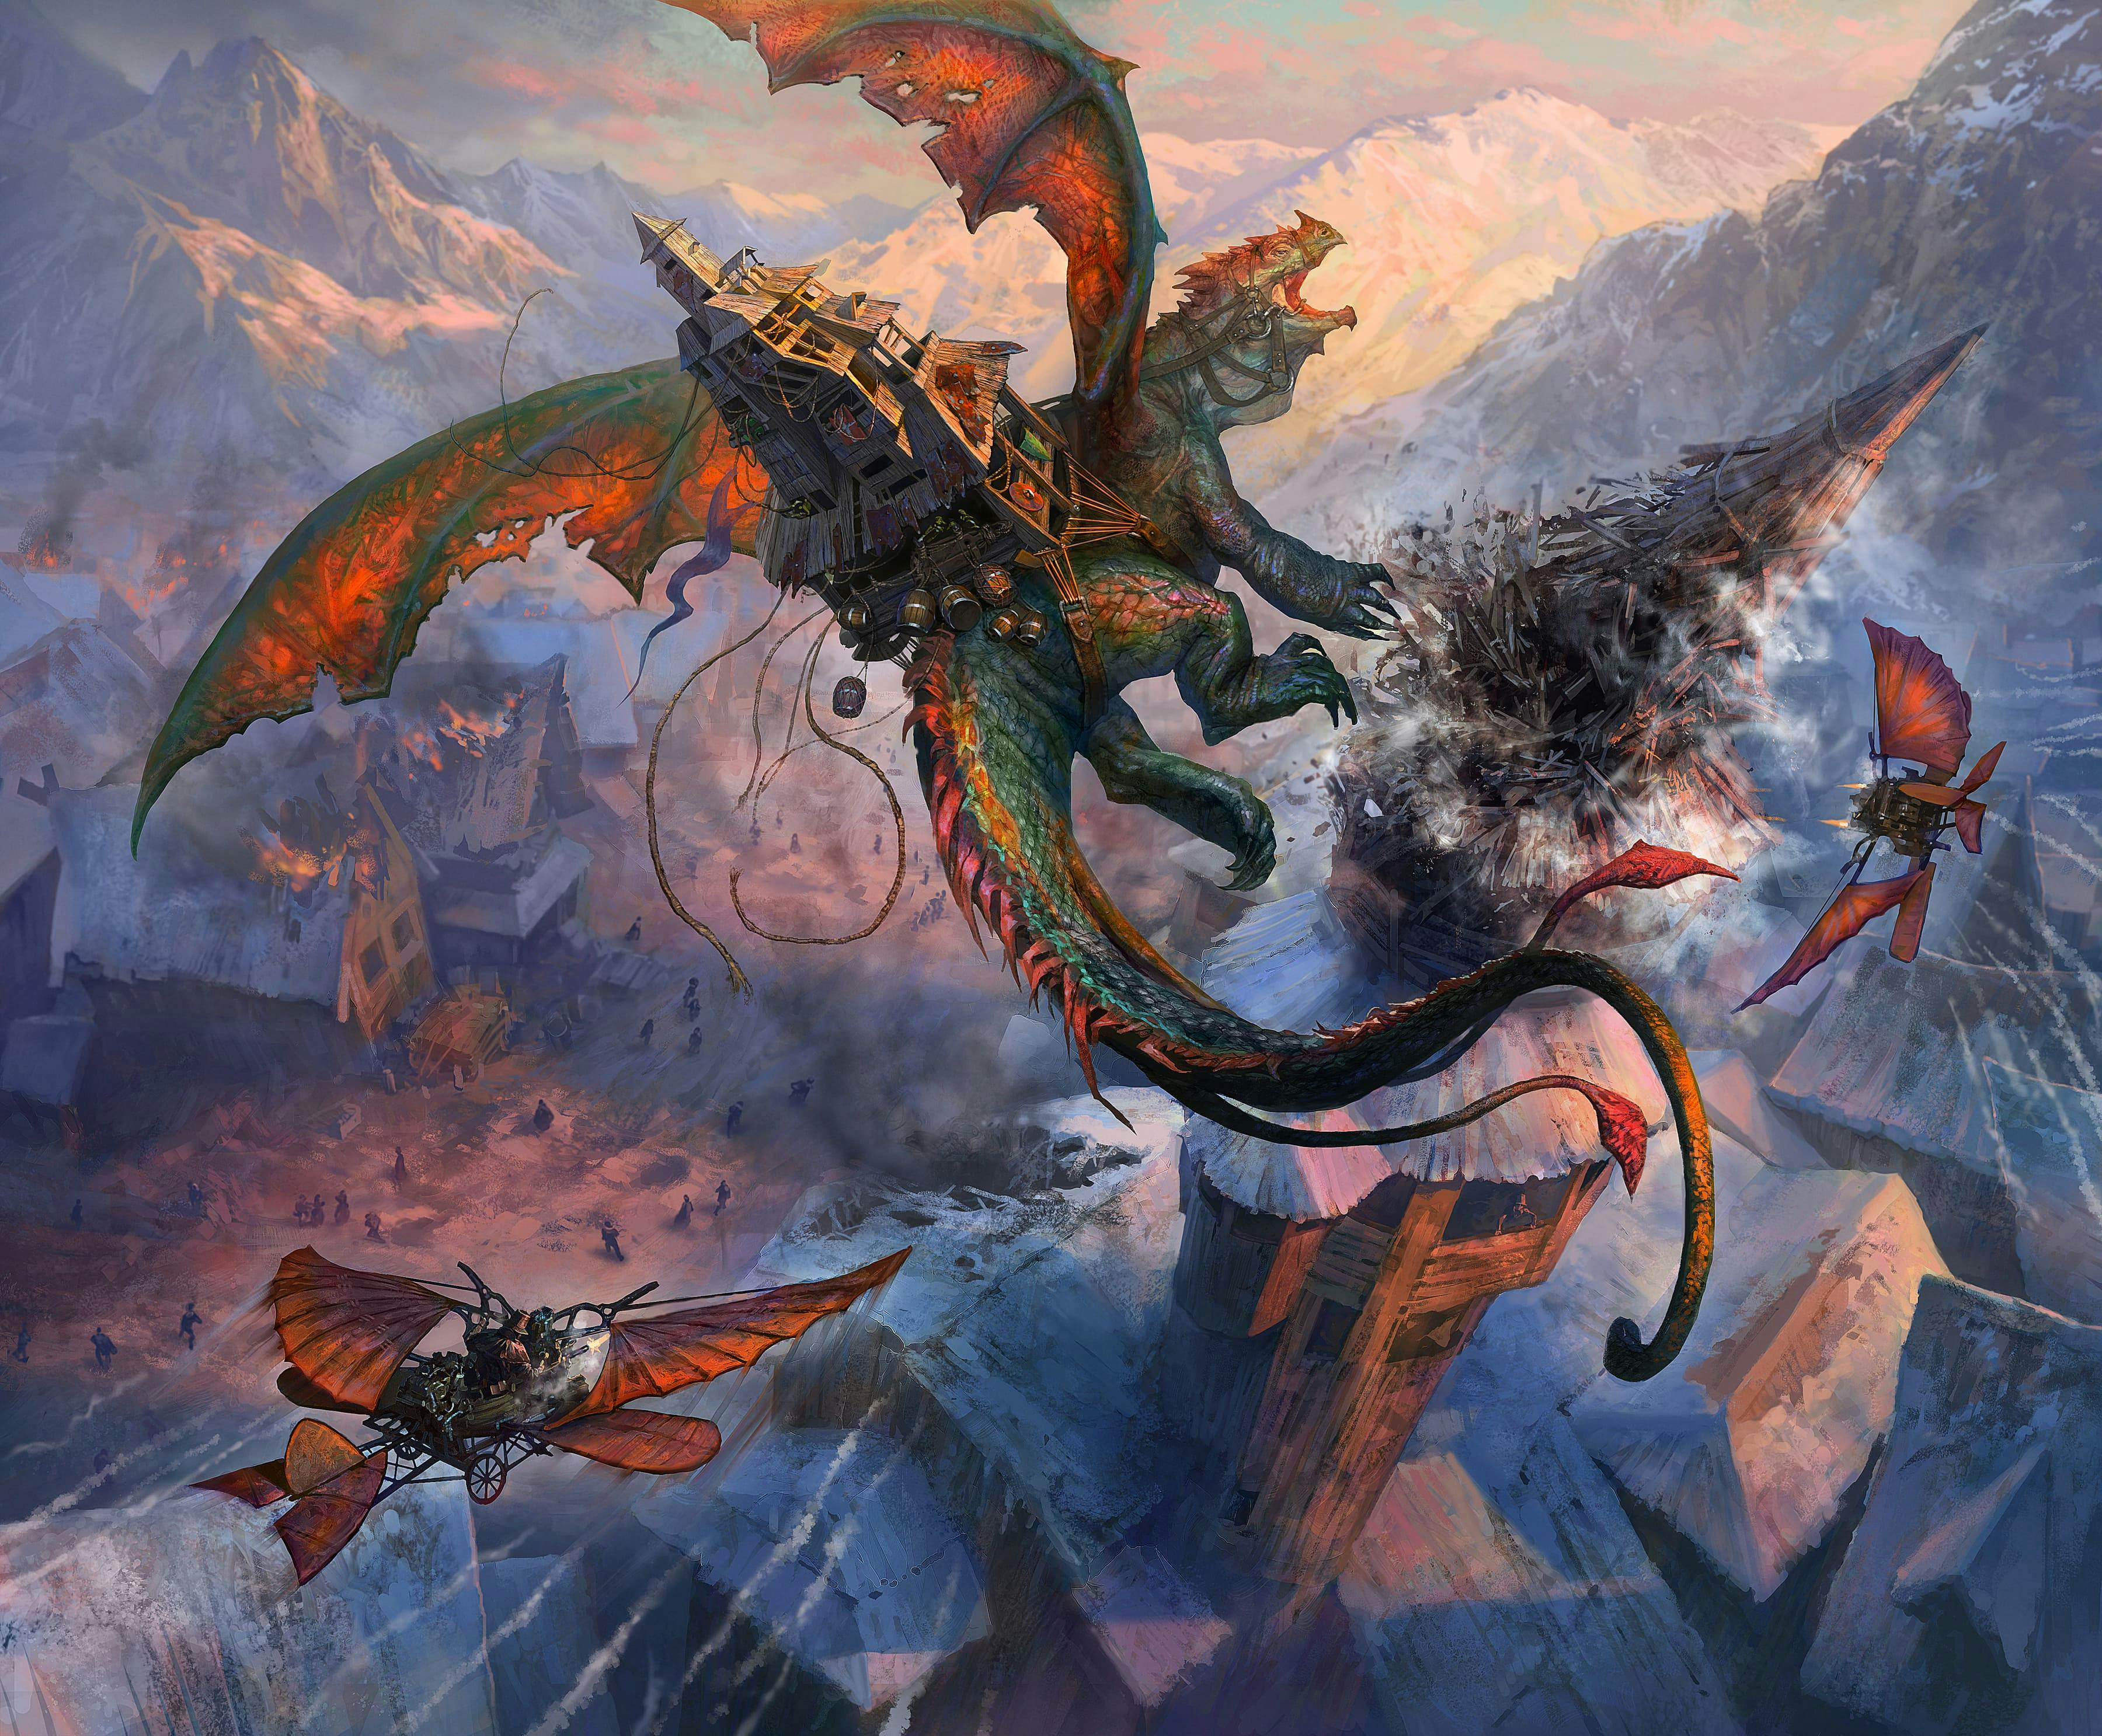 Odyssey of the Dragonlords! And Epic 5e Adventure! New Players Welcome!